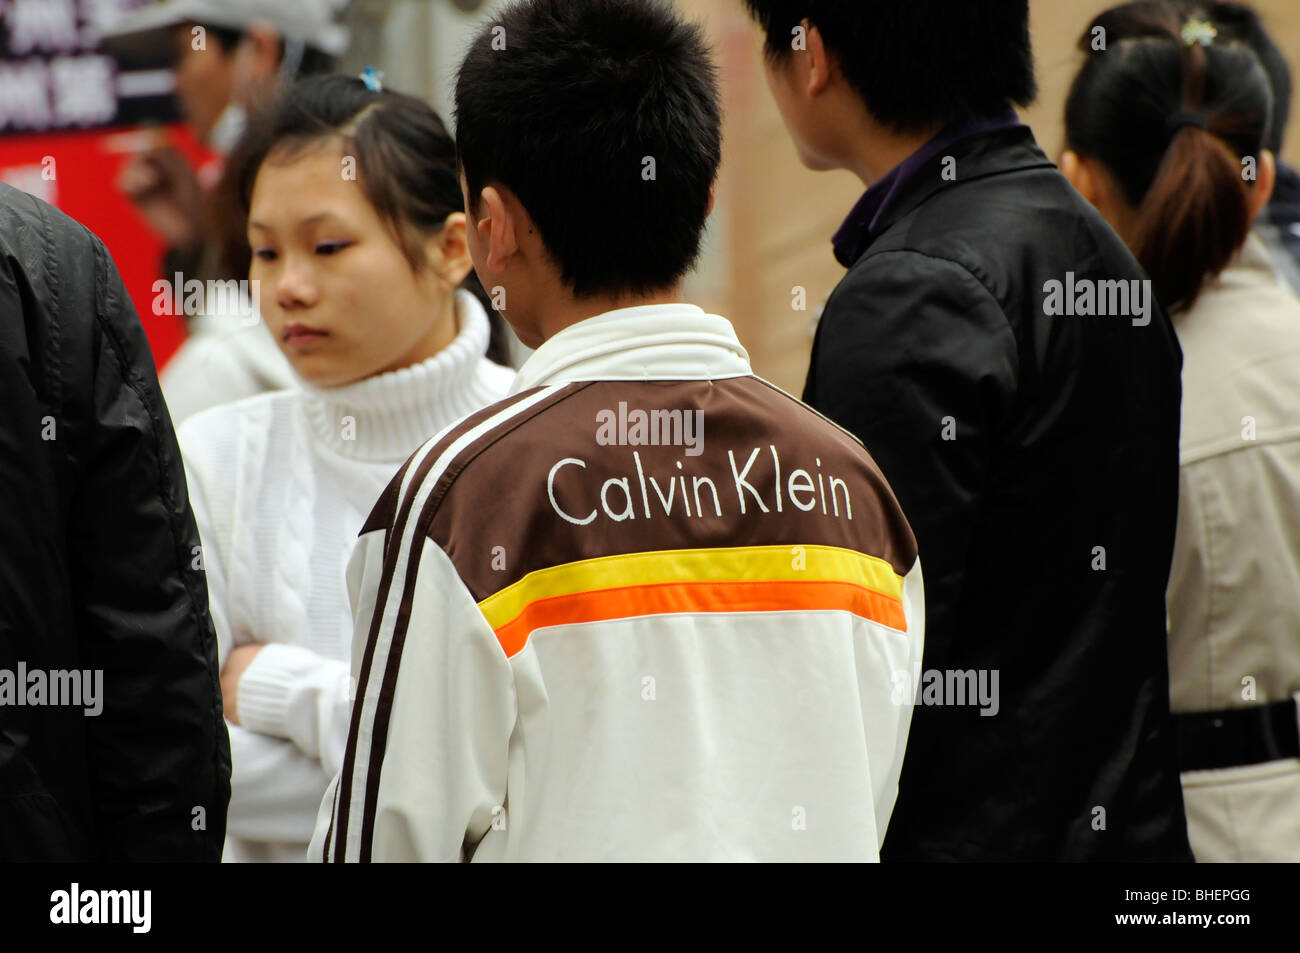 Chinese youth in a Calvin Kline jacket Stock Photo